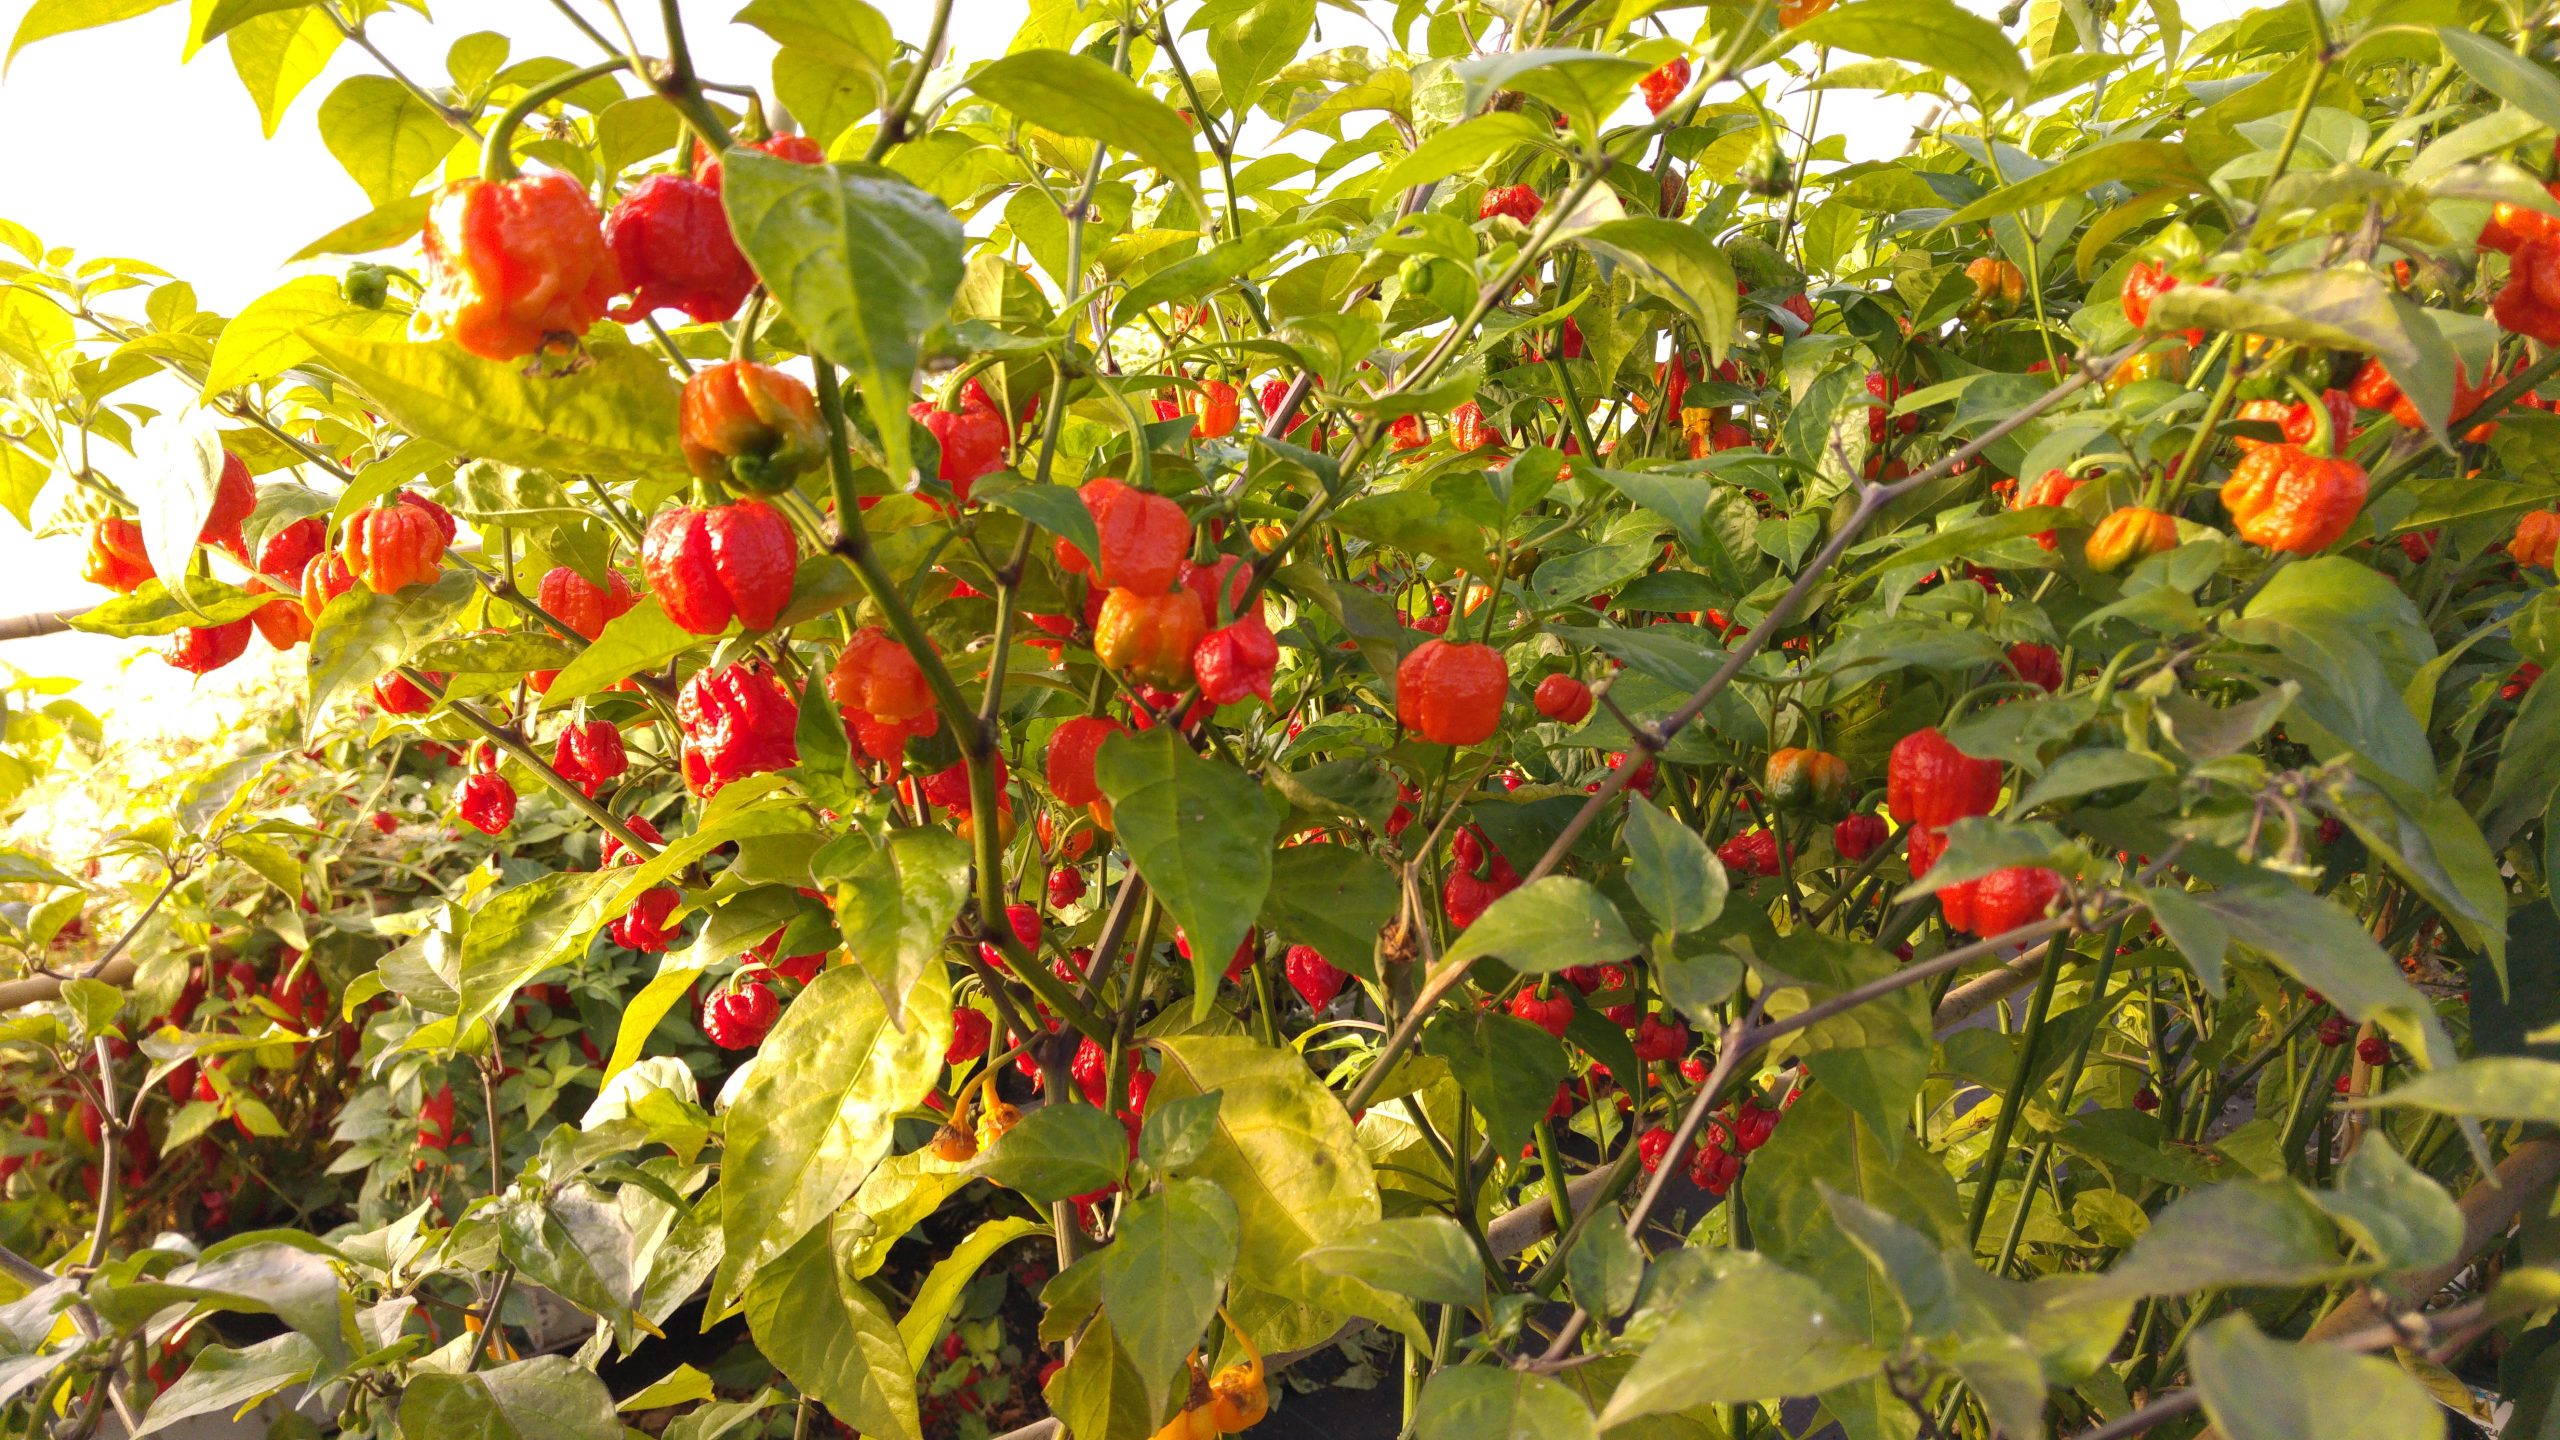 Picture of Trinidad Moruga Scorpion Chilli peppers growing here at Edible Ornamentals.